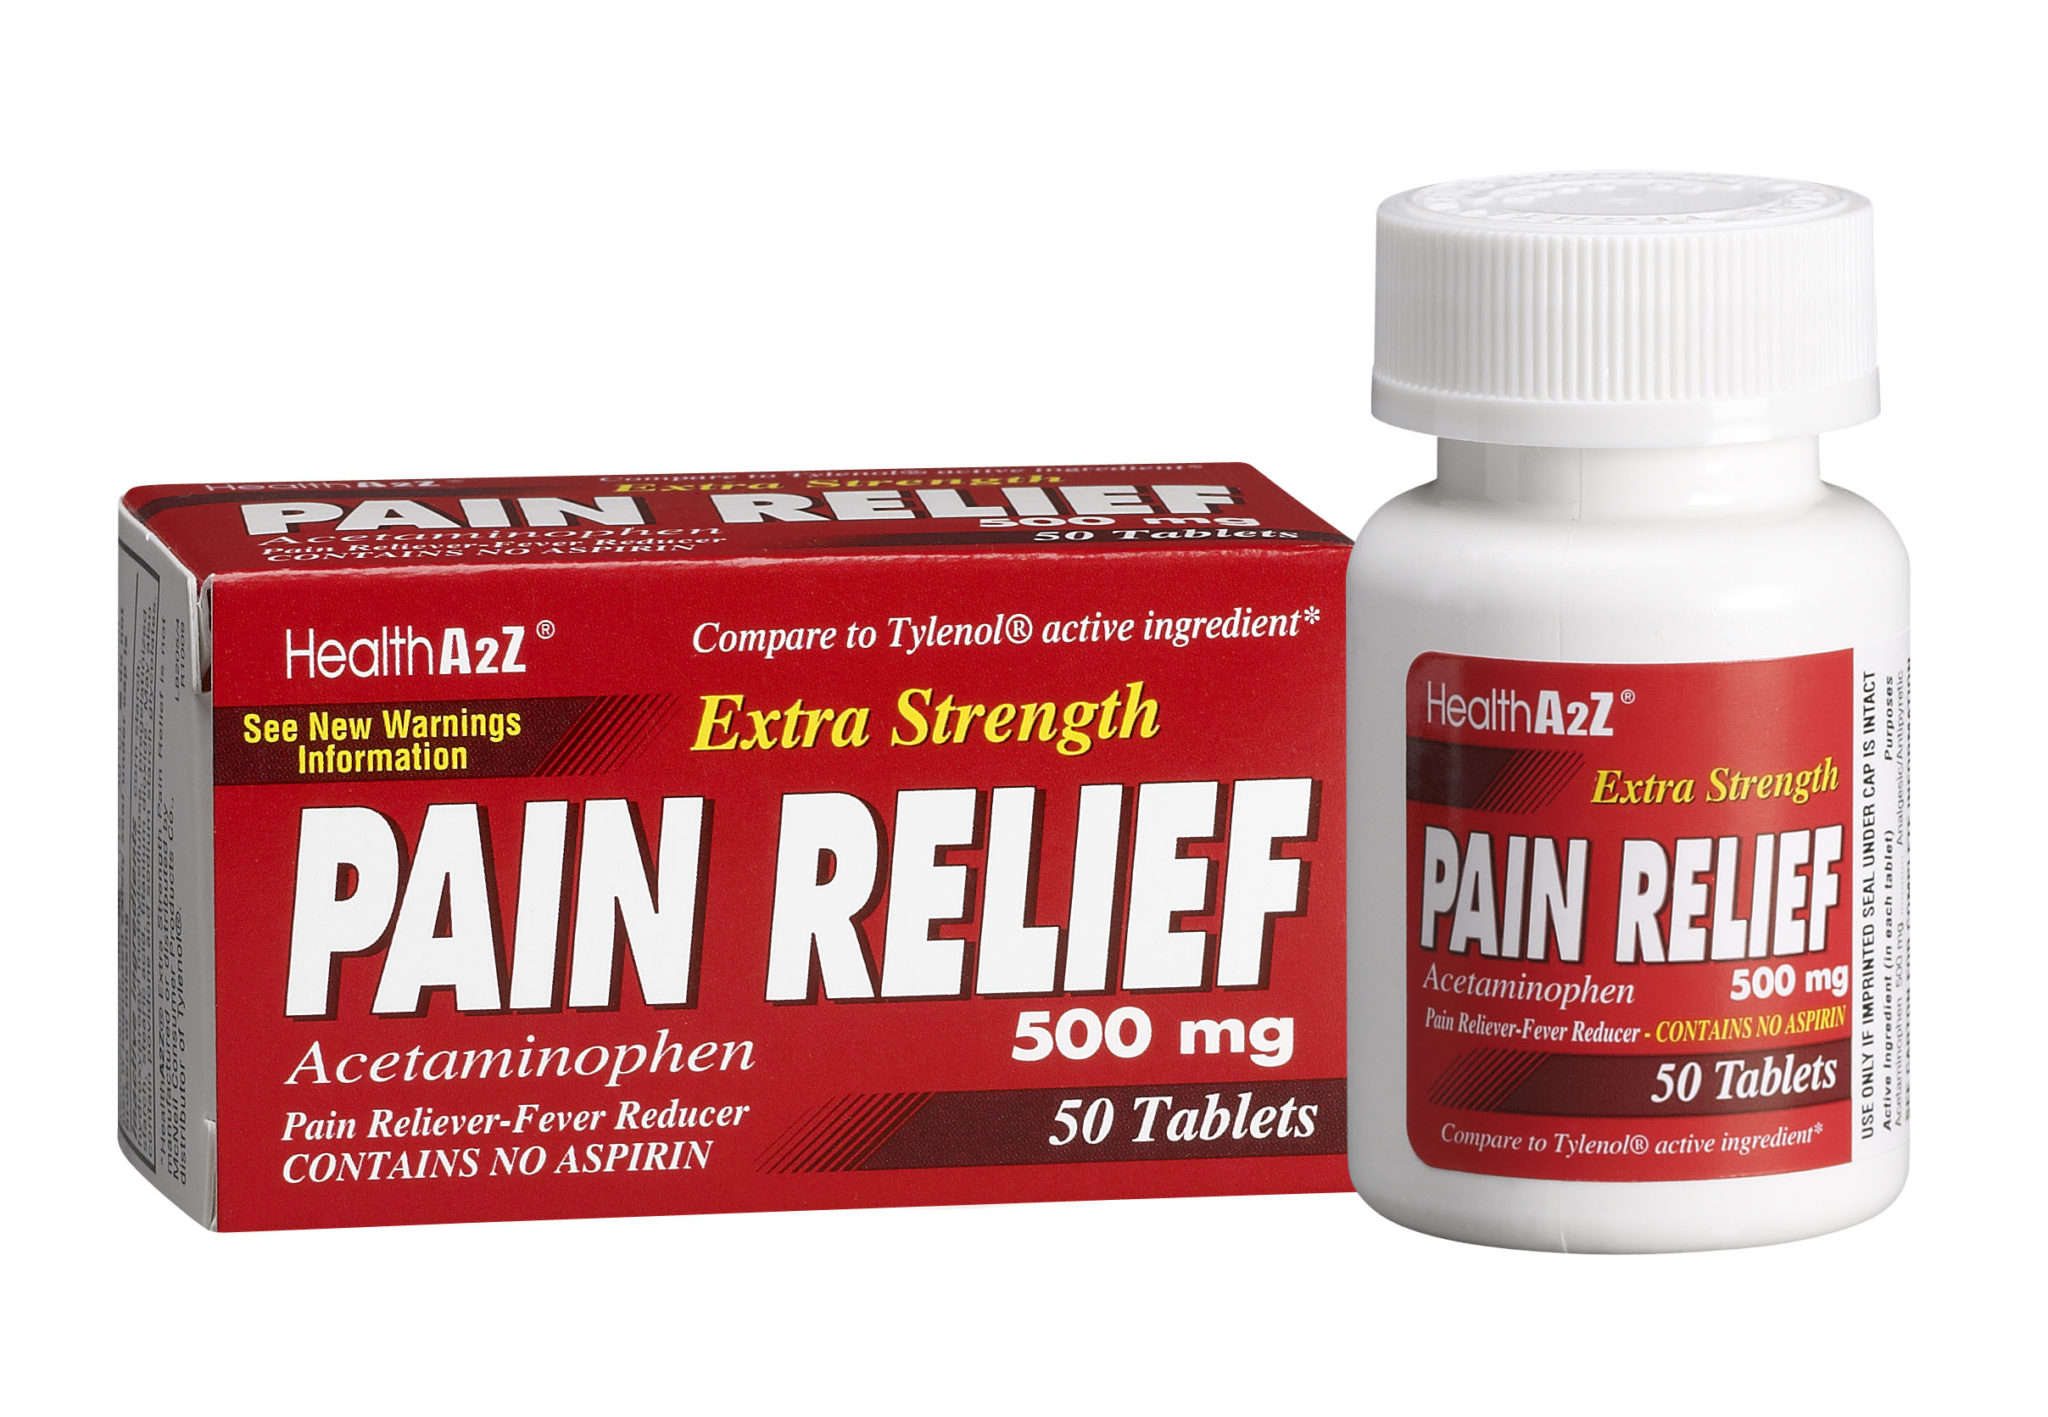 HealthA2Z Extra Strength Pain Relief Tablets